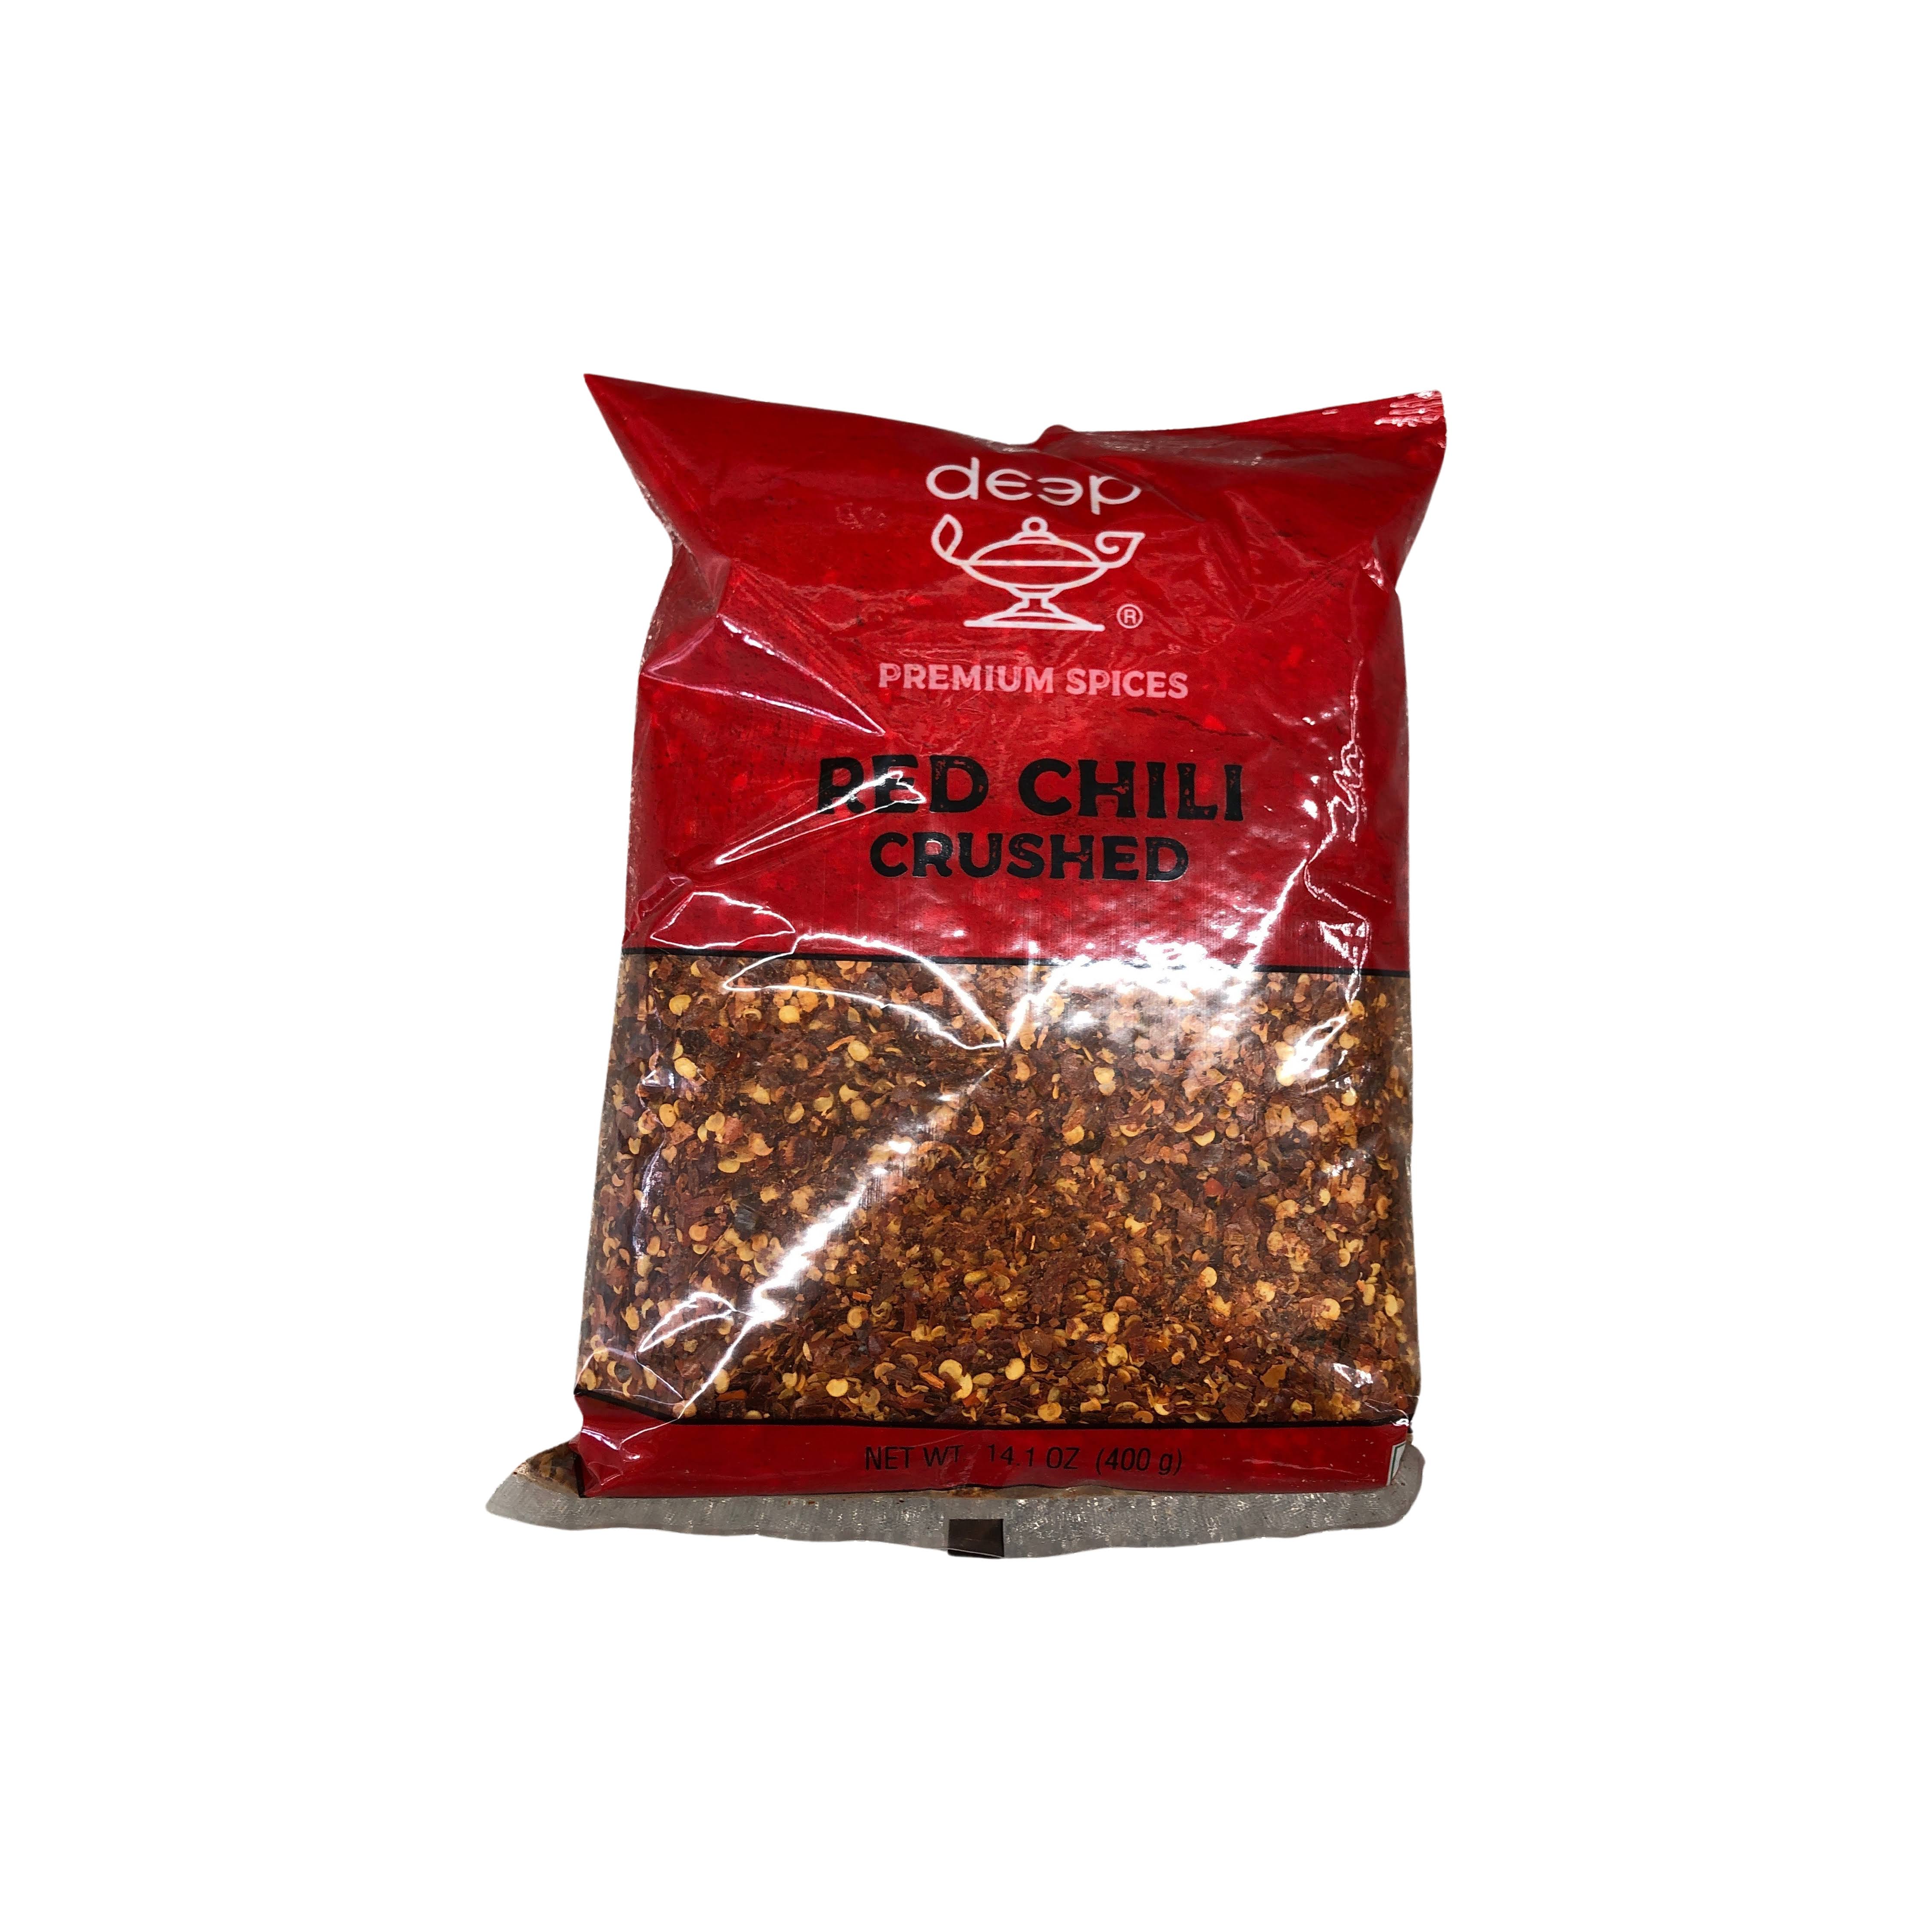 Deep Red Chilli Crushed, 14 oz